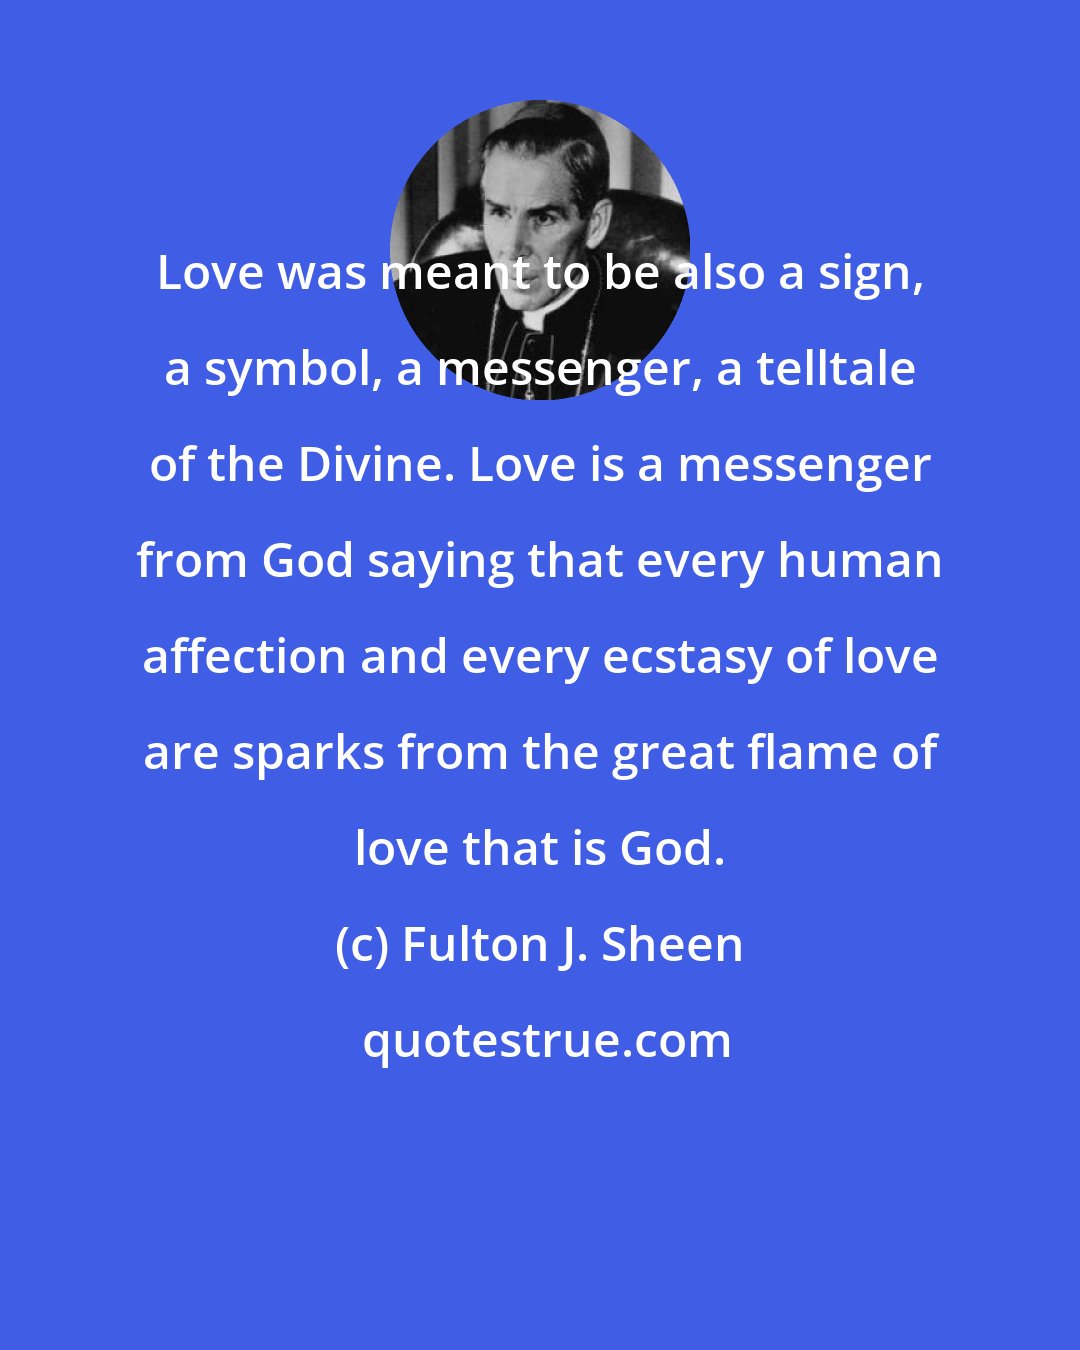 Fulton J. Sheen: Love was meant to be also a sign, a symbol, a messenger, a telltale of the Divine. Love is a messenger from God saying that every human affection and every ecstasy of love are sparks from the great flame of love that is God.